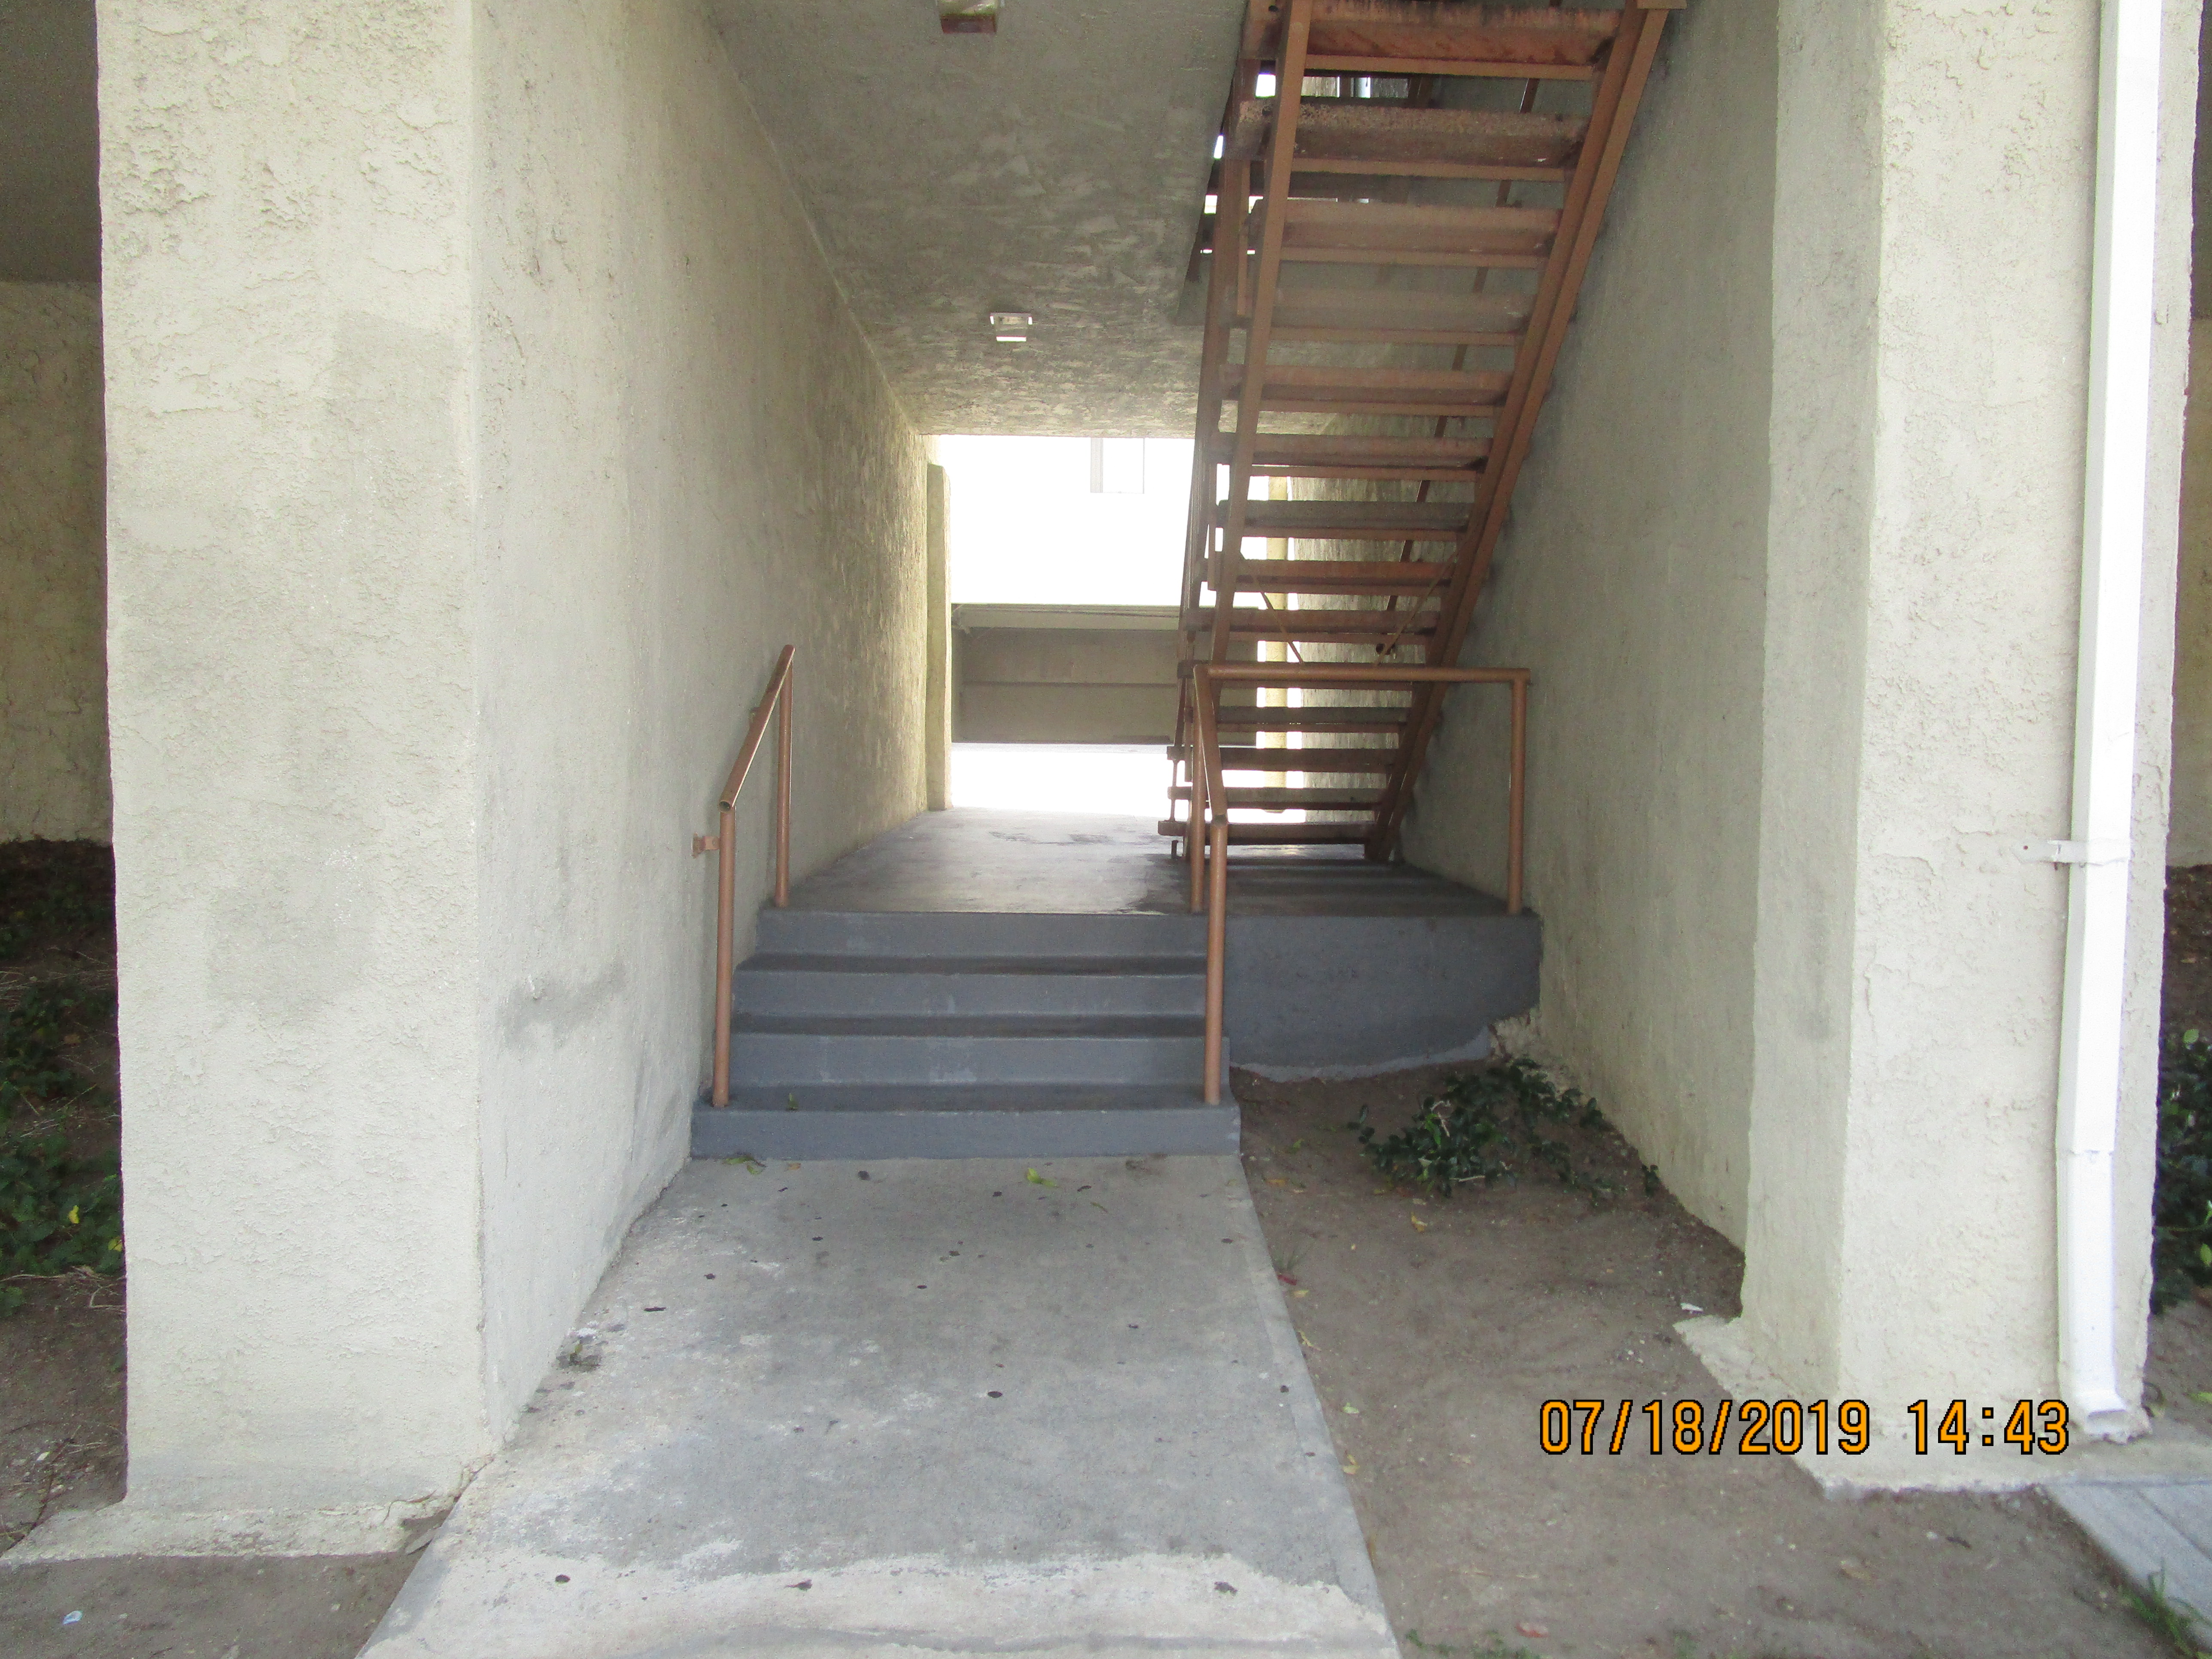 Image of building stairs in brown and grey color